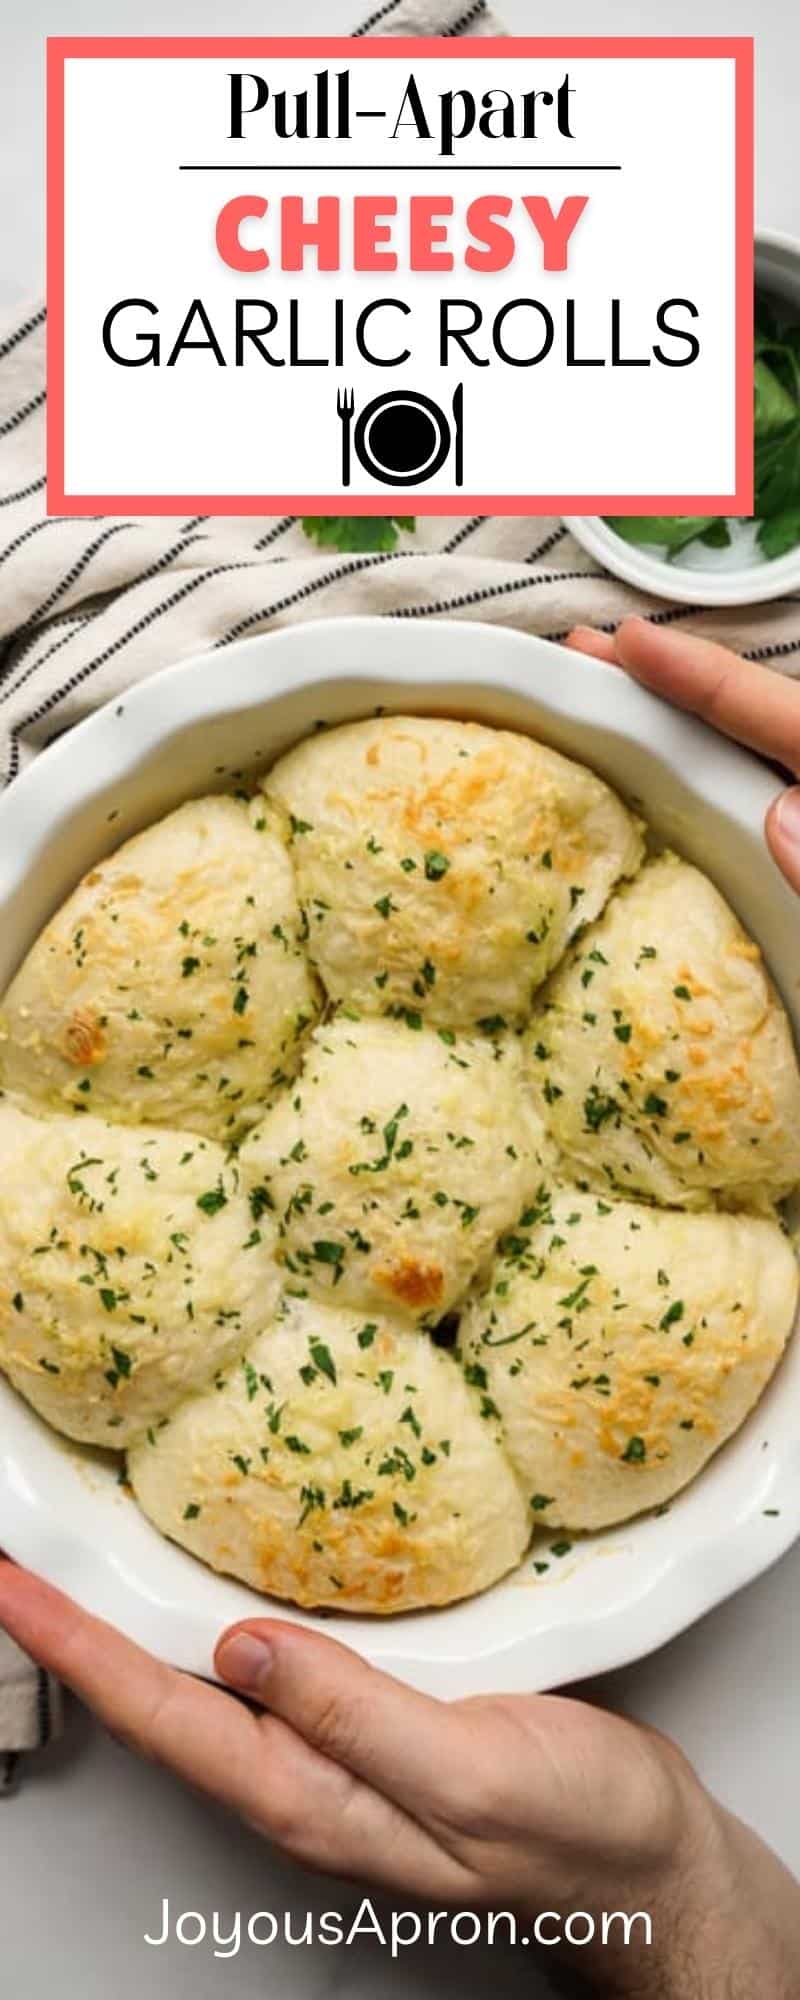 Easy Cheesy Garlic Rolls - pull apart dinner yeast rolls topped with garlic butter and herbs. So easy and yummy! Perfect bread side recipe for dinner or holiday meals. via @joyousapron